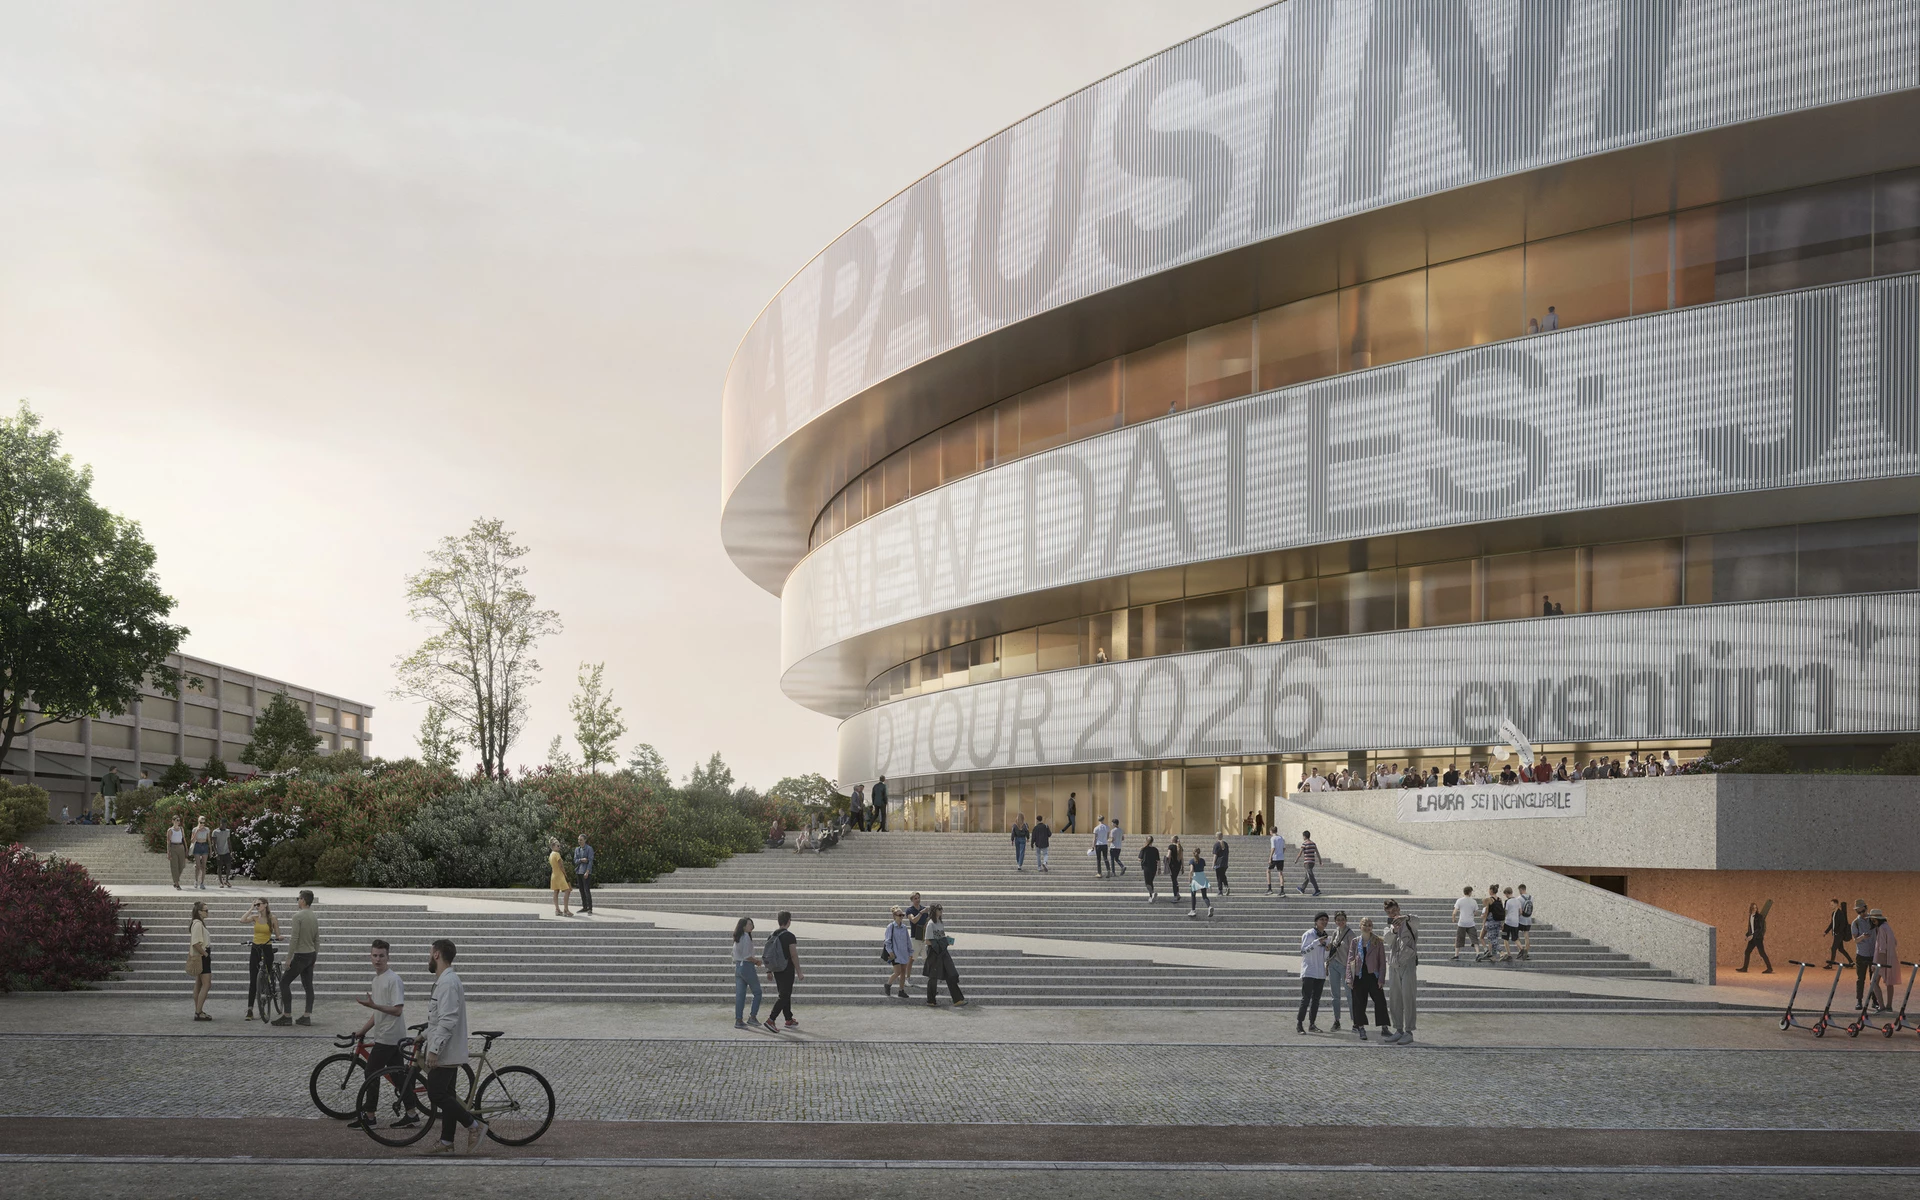 It is planned for the Arena Santa Giulia to become Italy's leading multi-purpose venue after the 2026 Winter Olympic Games ©David Chipperfield Architects 